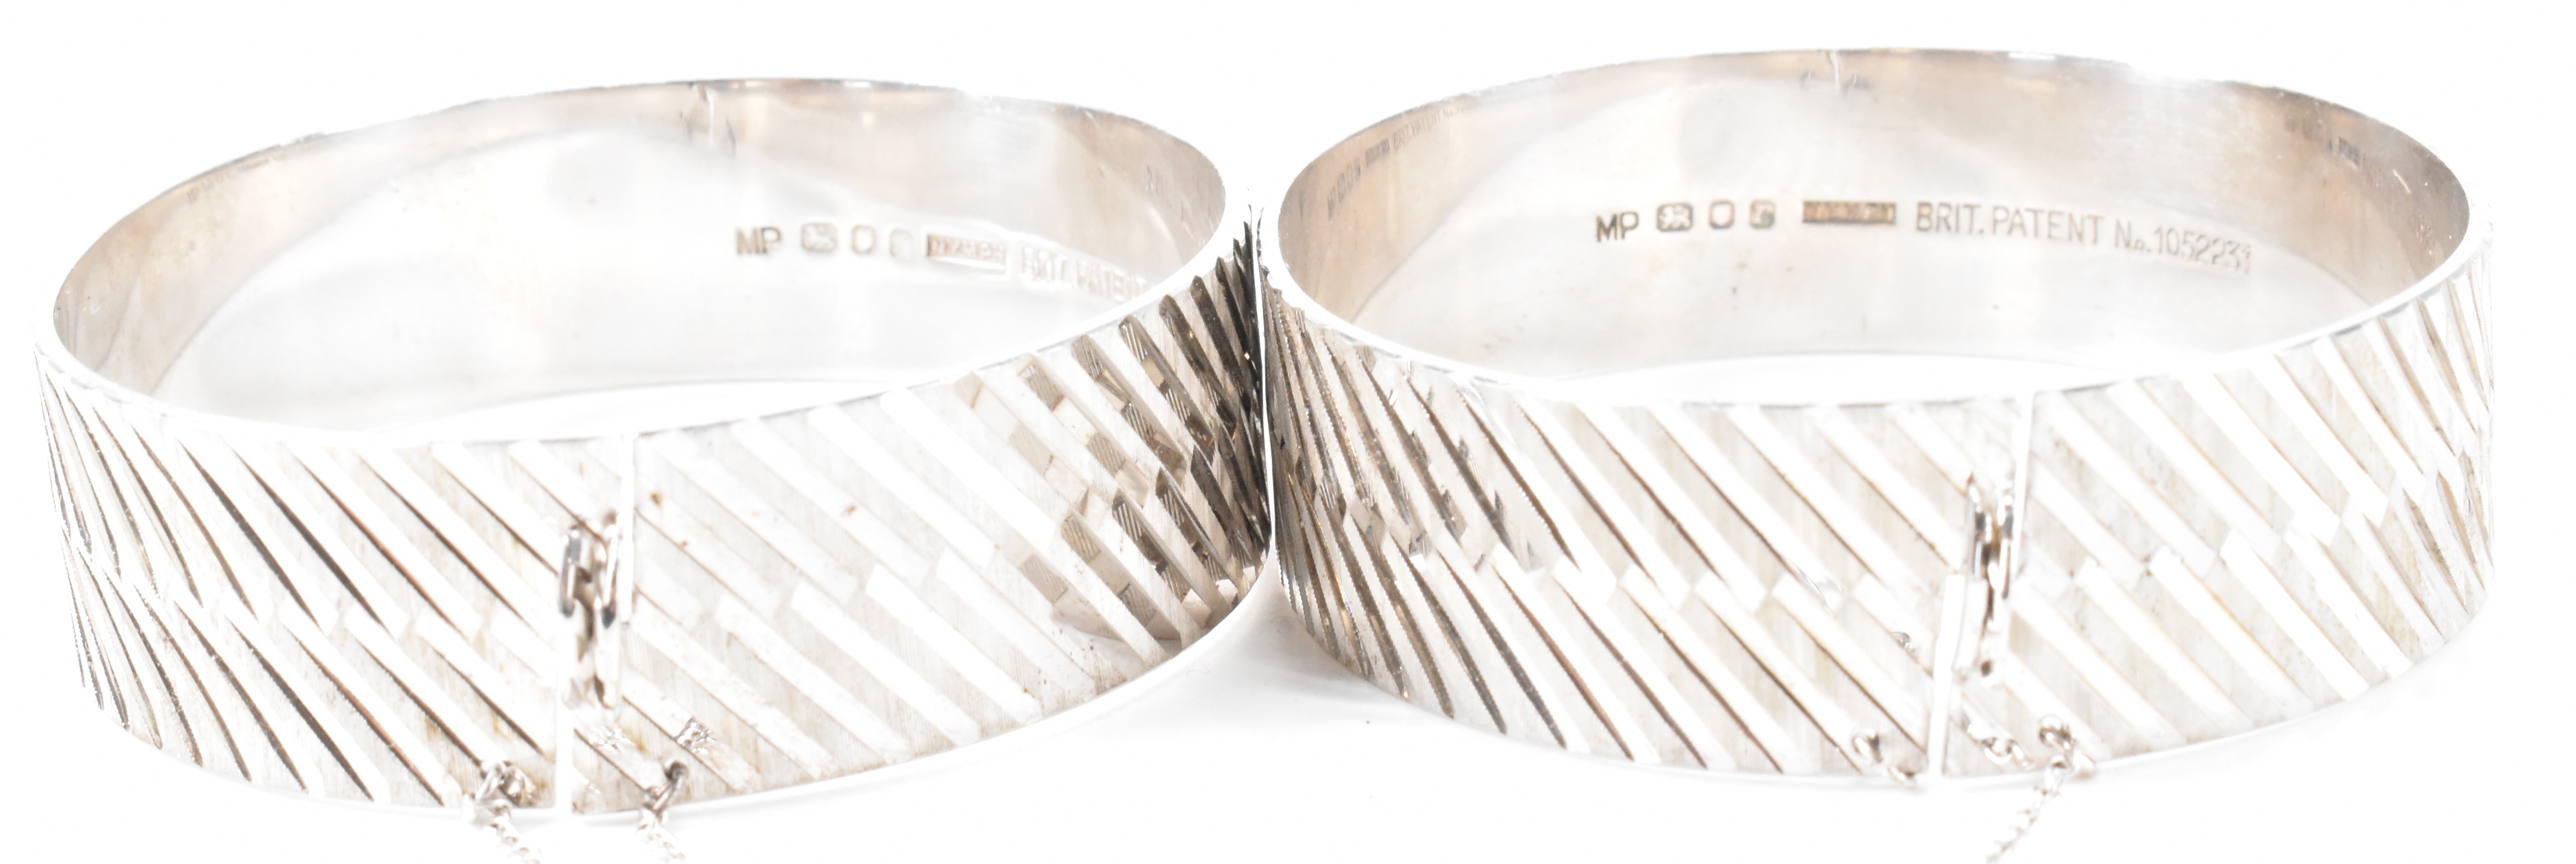 PAIR 1970S HALLMARKED SILVER BANGLES - Image 5 of 6